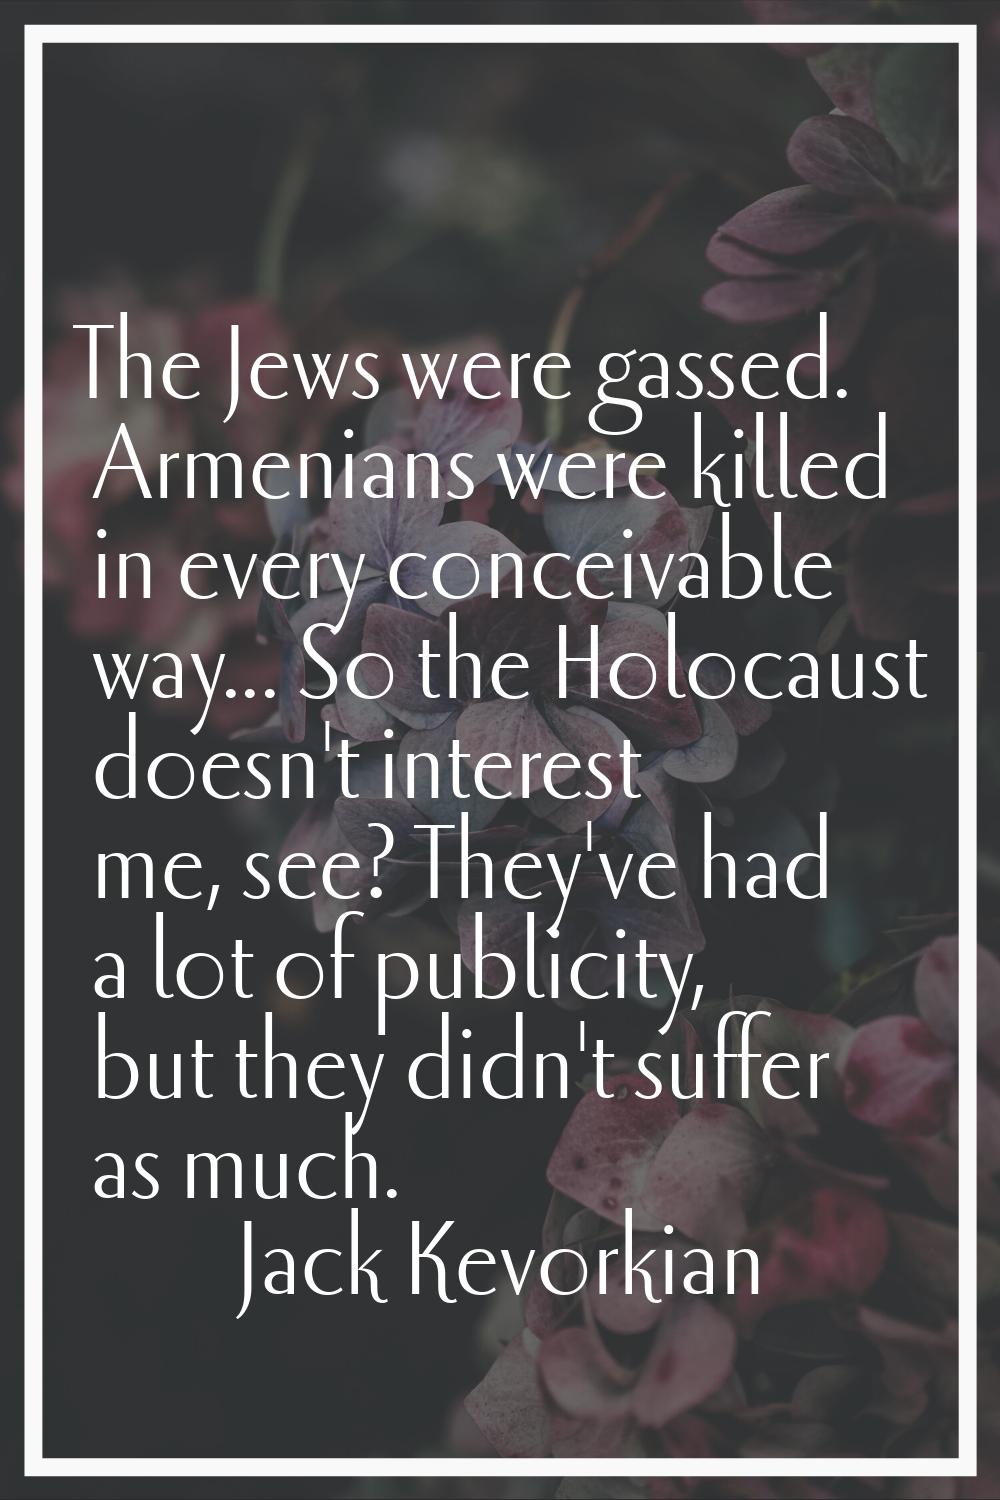 The Jews were gassed. Armenians were killed in every conceivable way... So the Holocaust doesn't in